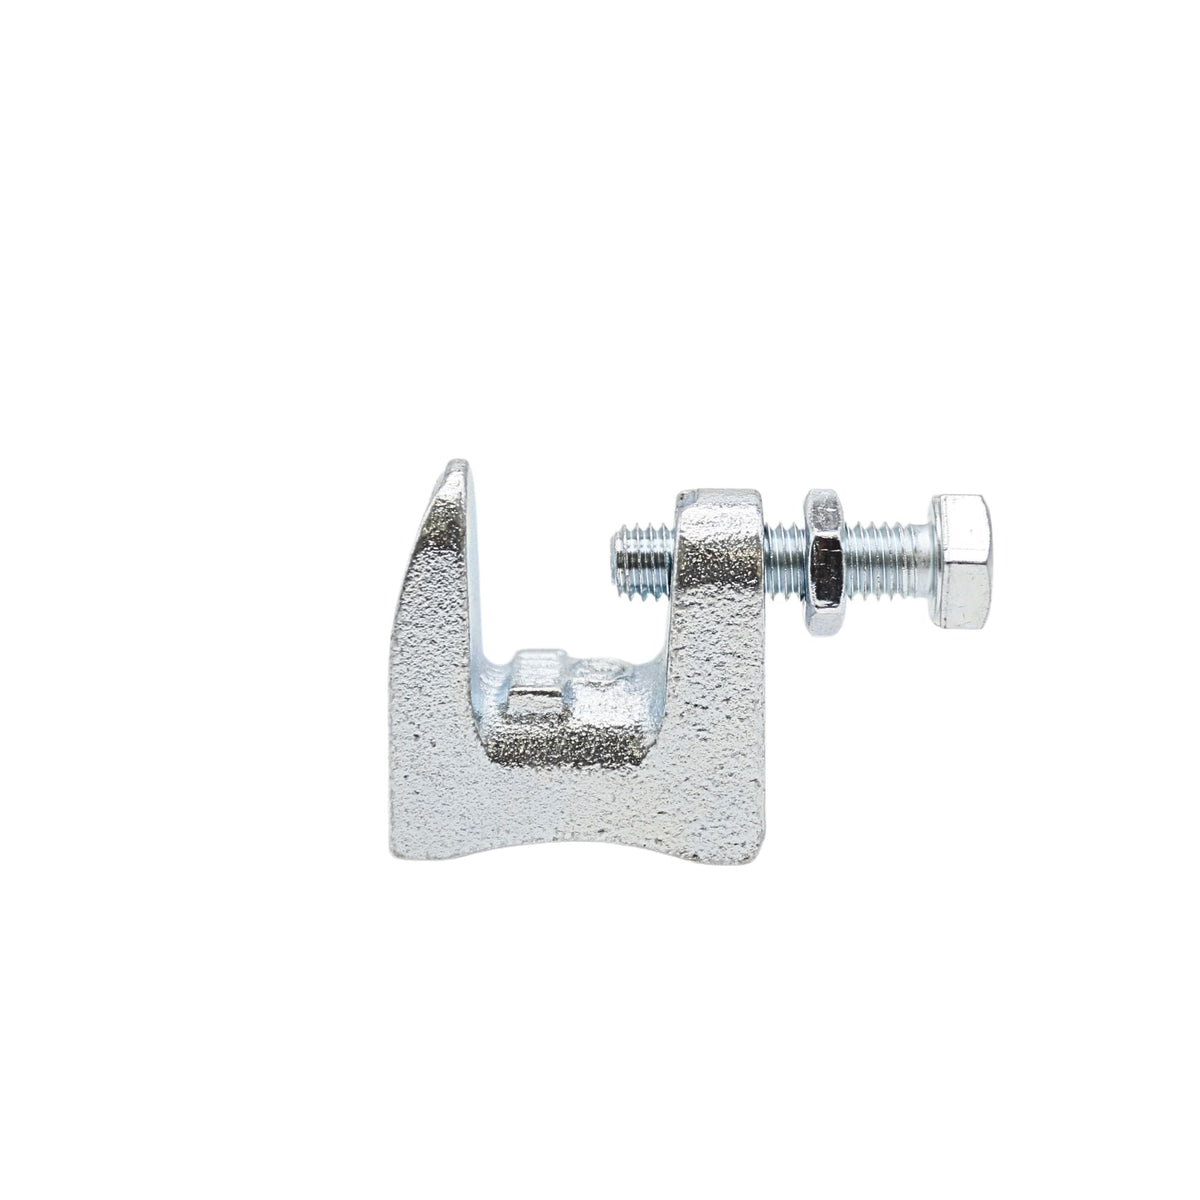 Prevost l M8 Beam Clamp | CP M8 used on prevos1 product line - left side